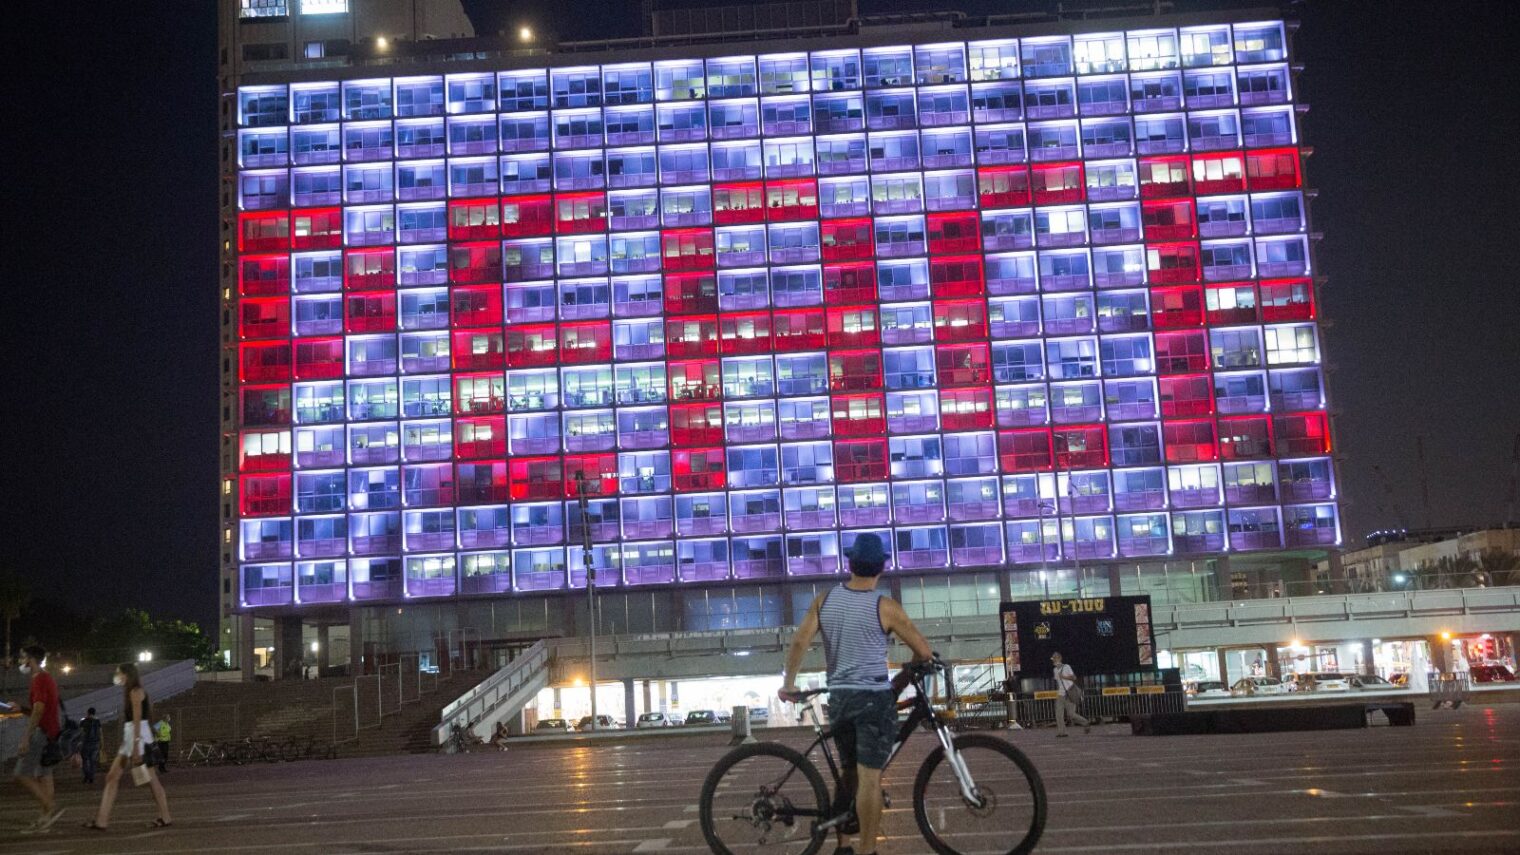 Tel Aviv City Hall lights up with the word ‘Peace” following the signing of the Abraham Accords, September 15, 2020. Photo by Miriam Alster/Flash90